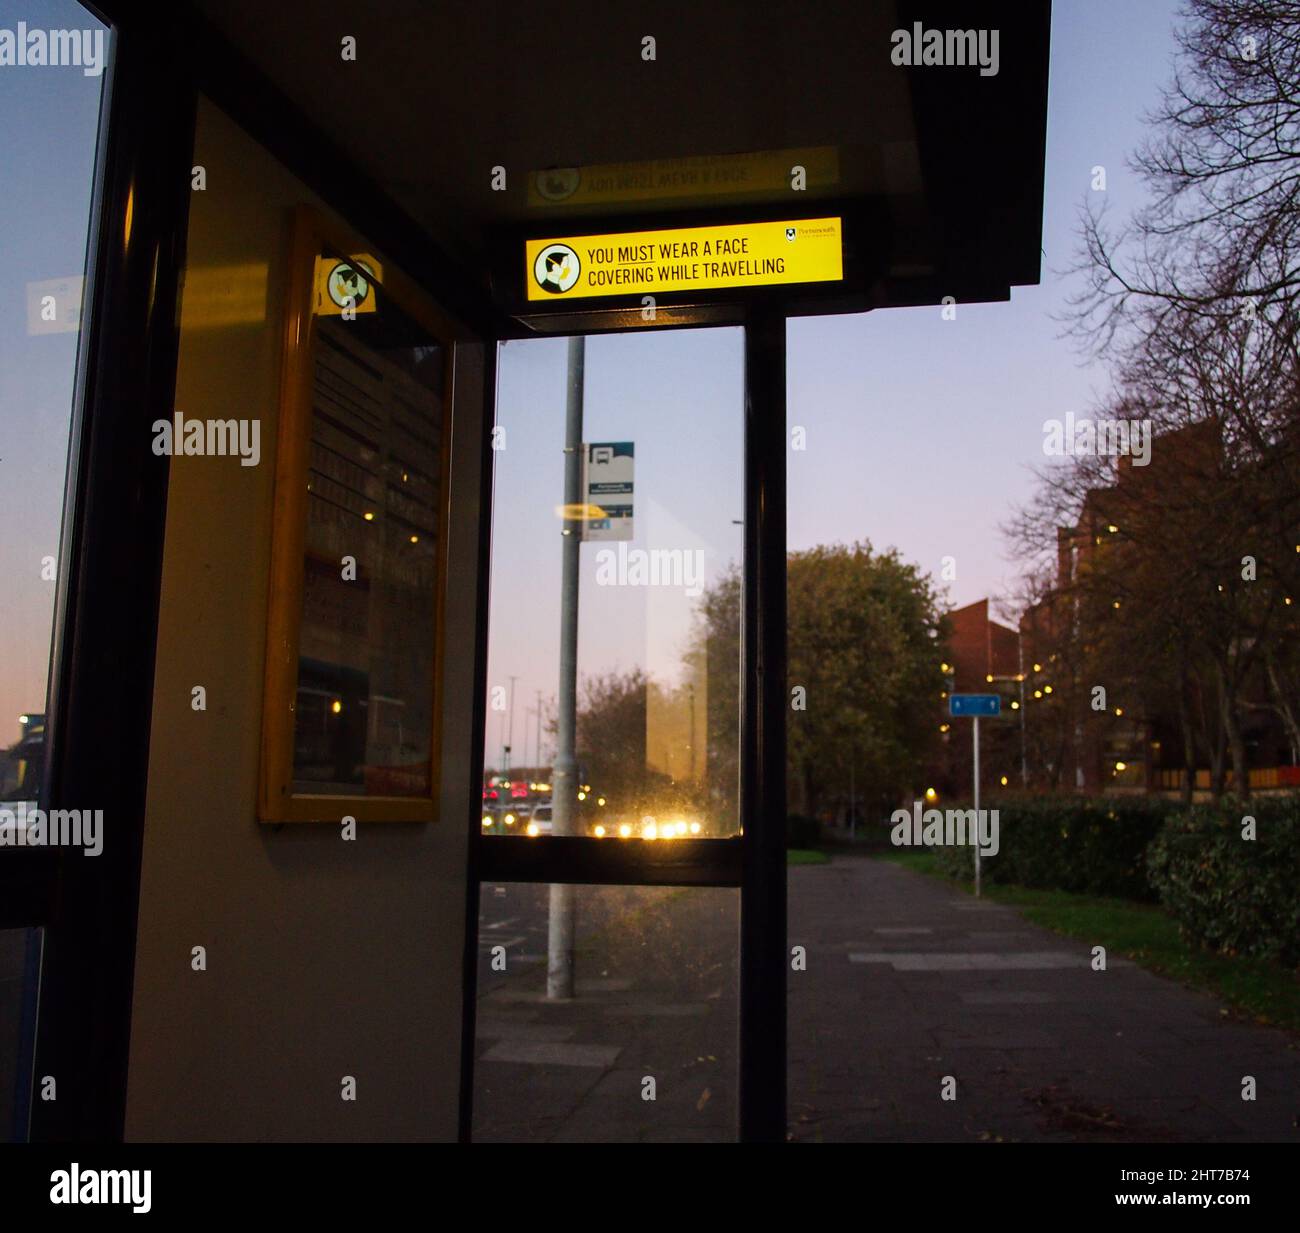 A bus stop shelter with electronic sign in England Stock Photo